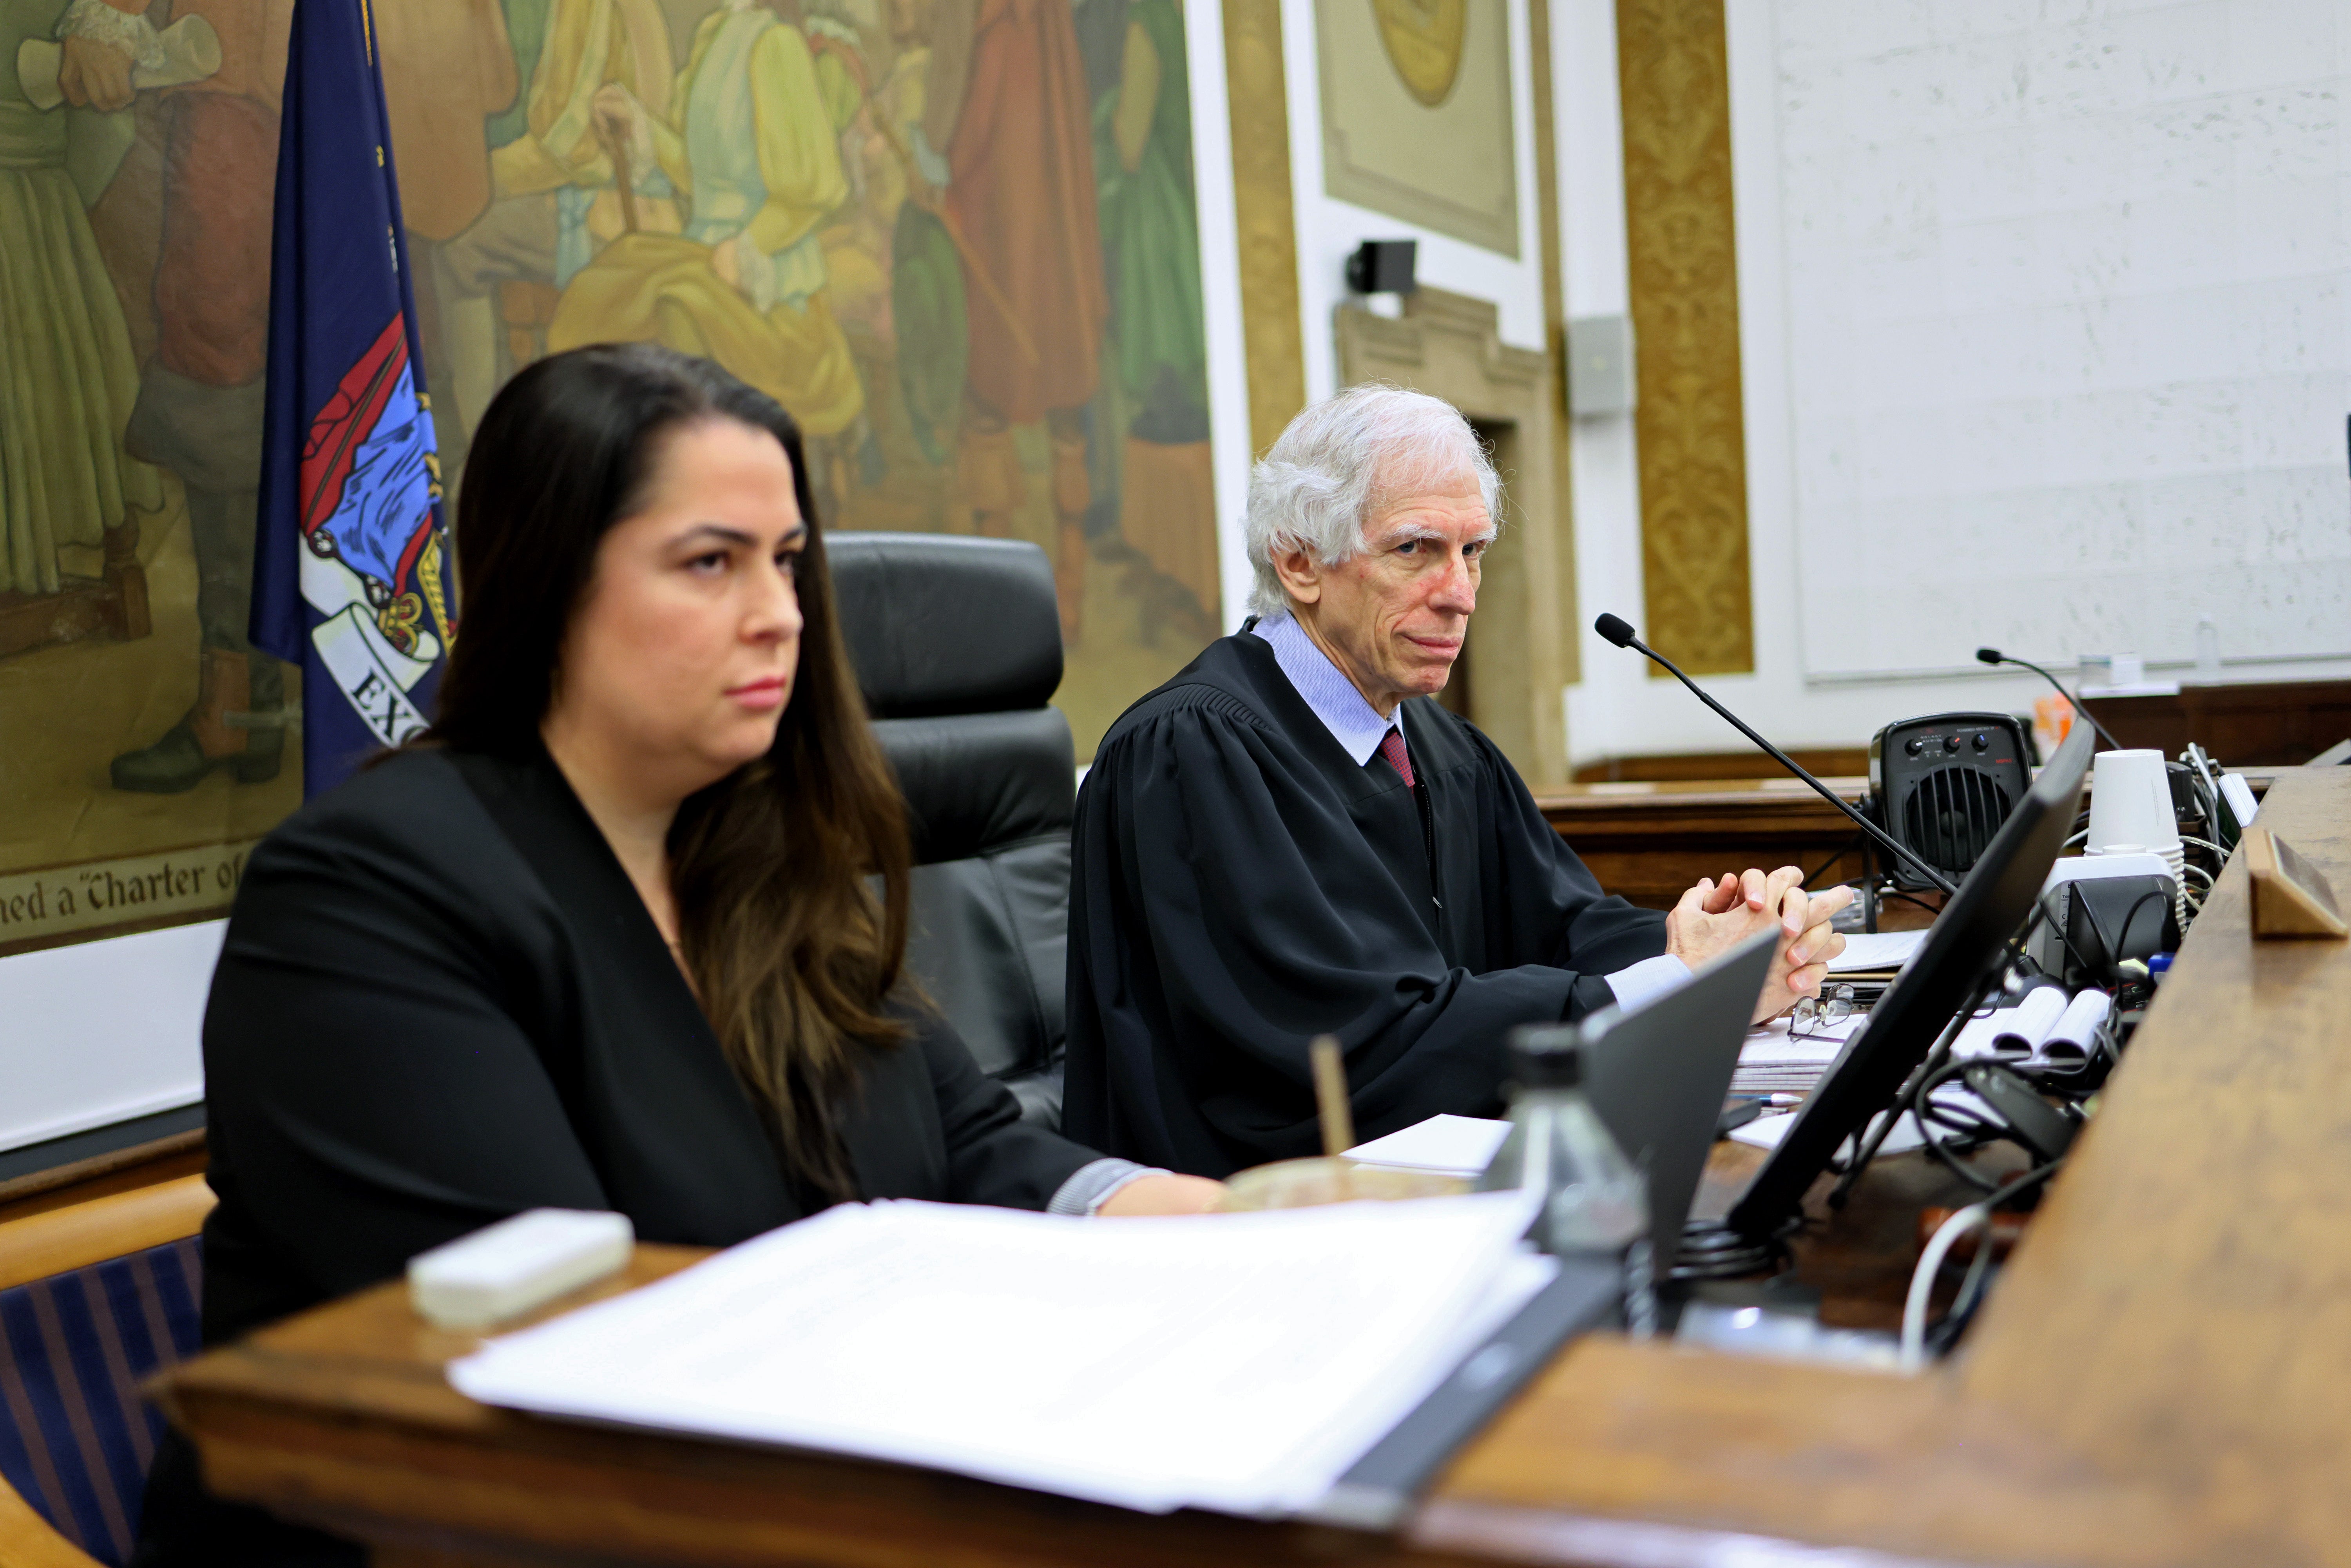 Justice Arthur Engoron, right, presides over Donald Trump’s civil fraud trial on 13 November, with his chief clerk Allison Greenfield beside him.